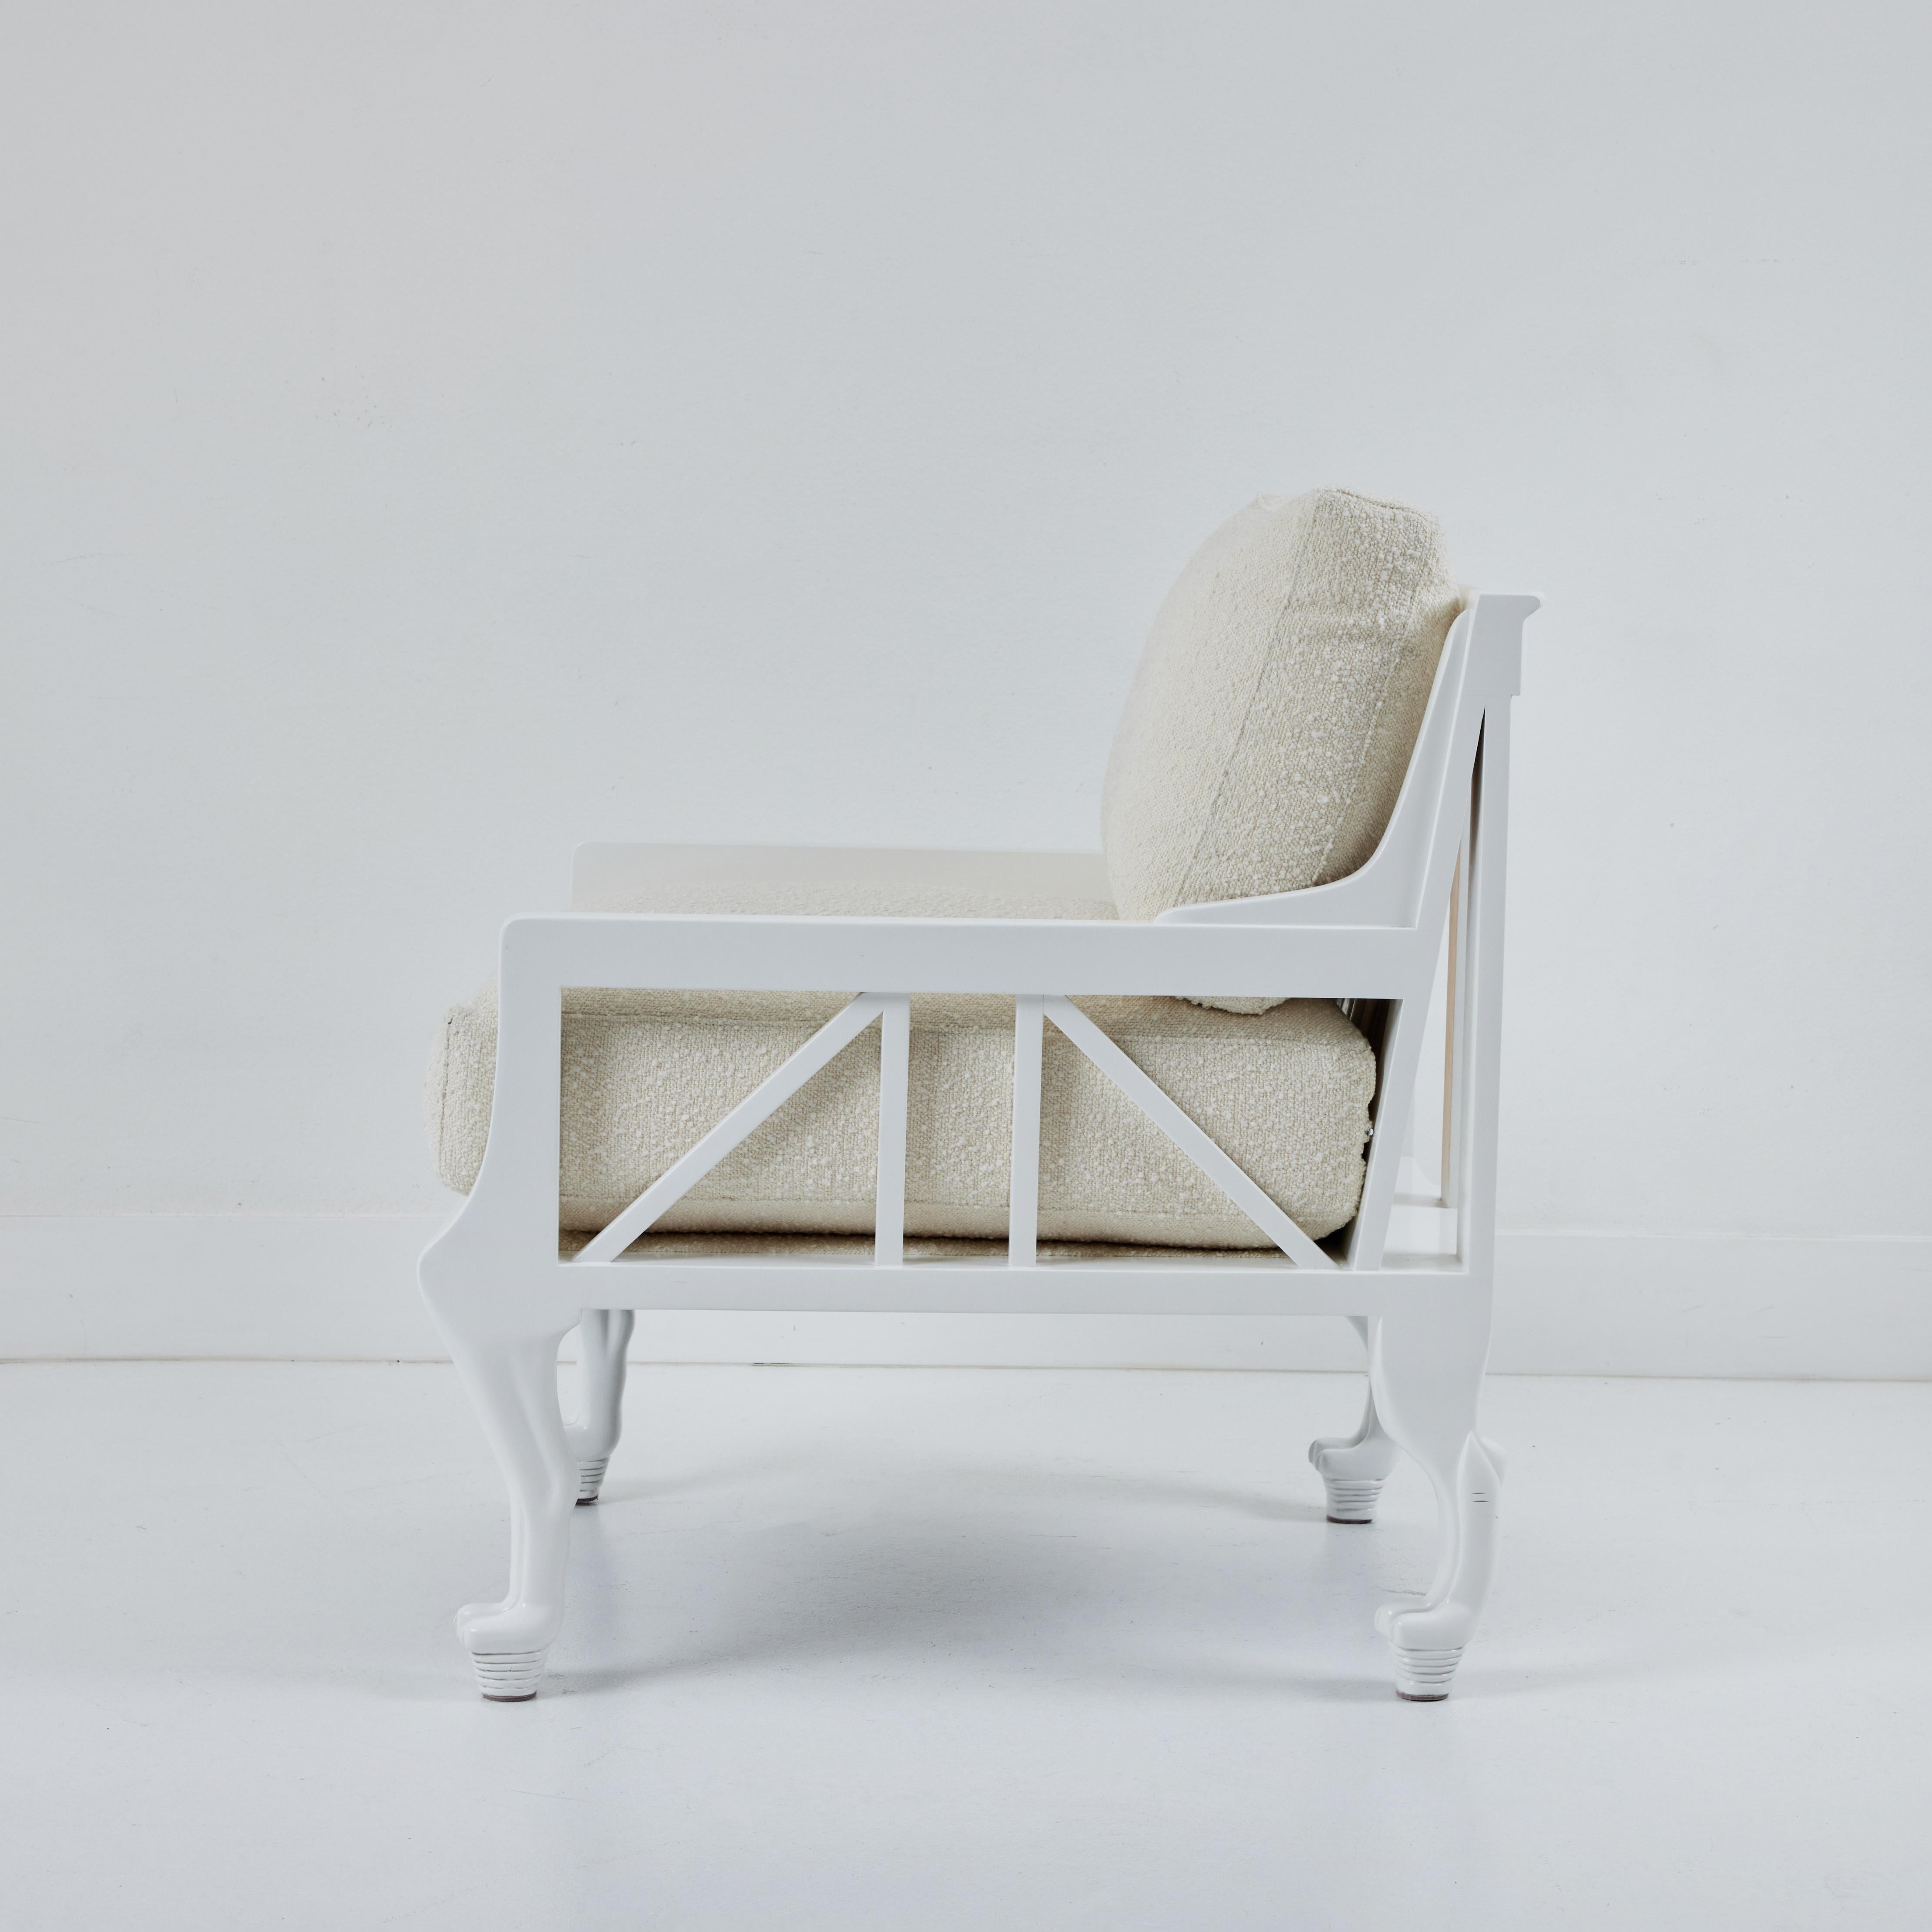 American Thebes Chairs designed by John Hutton for Randolf and Hein